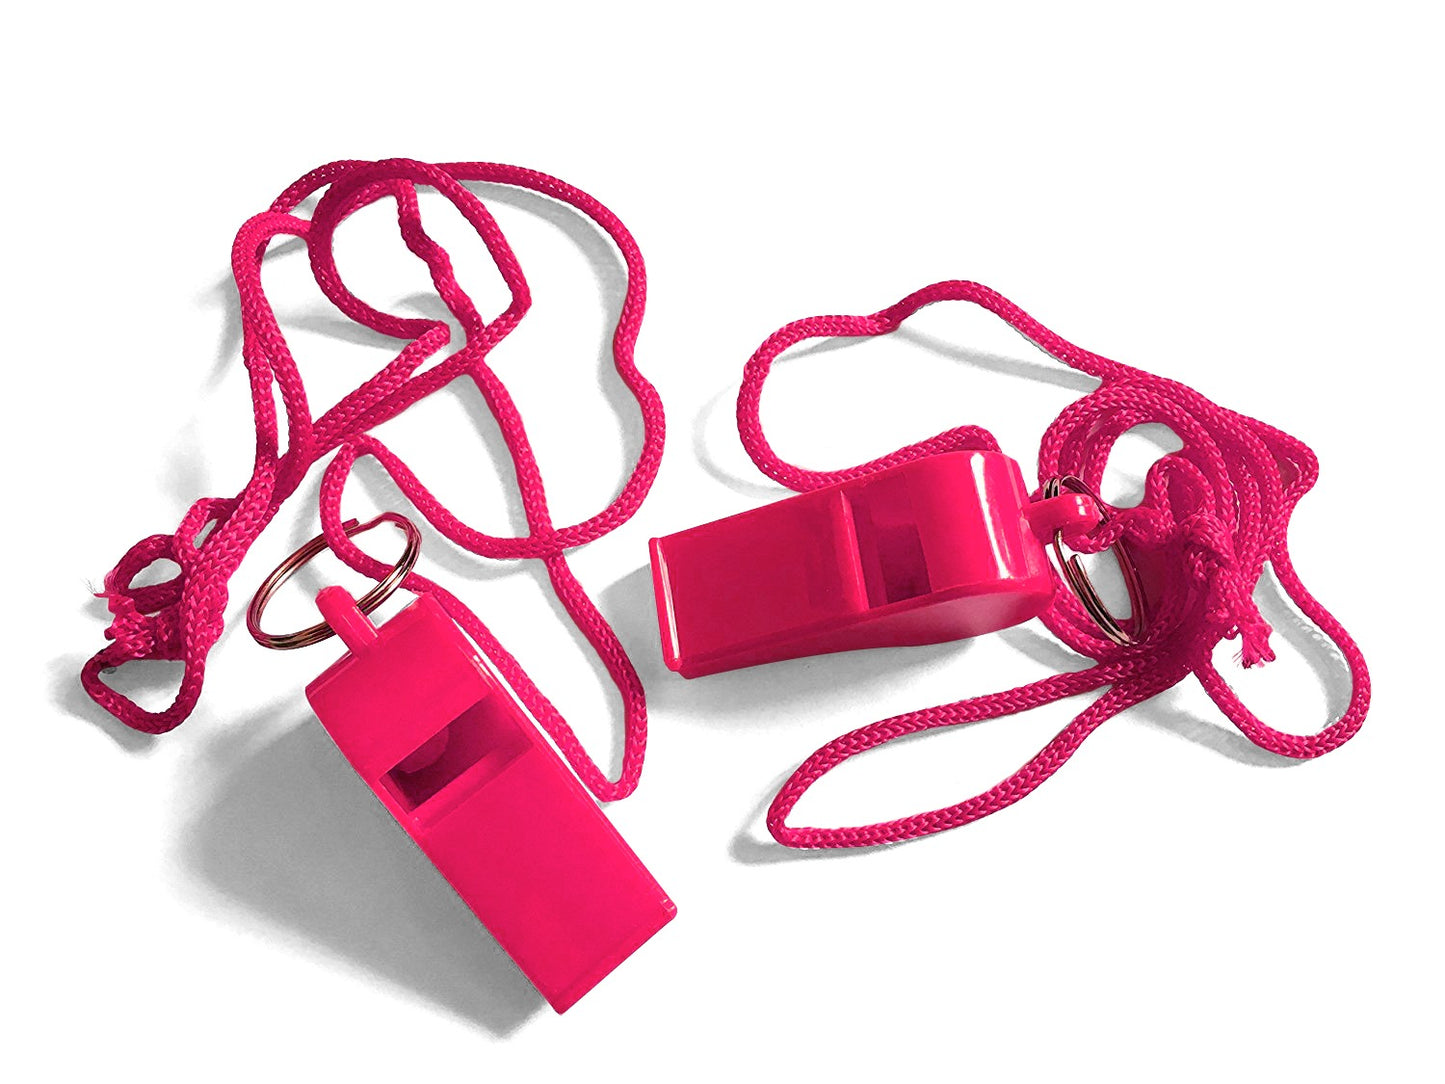 Pack of 15 Pink Plastic Whistles with Lanyard Neck Cord